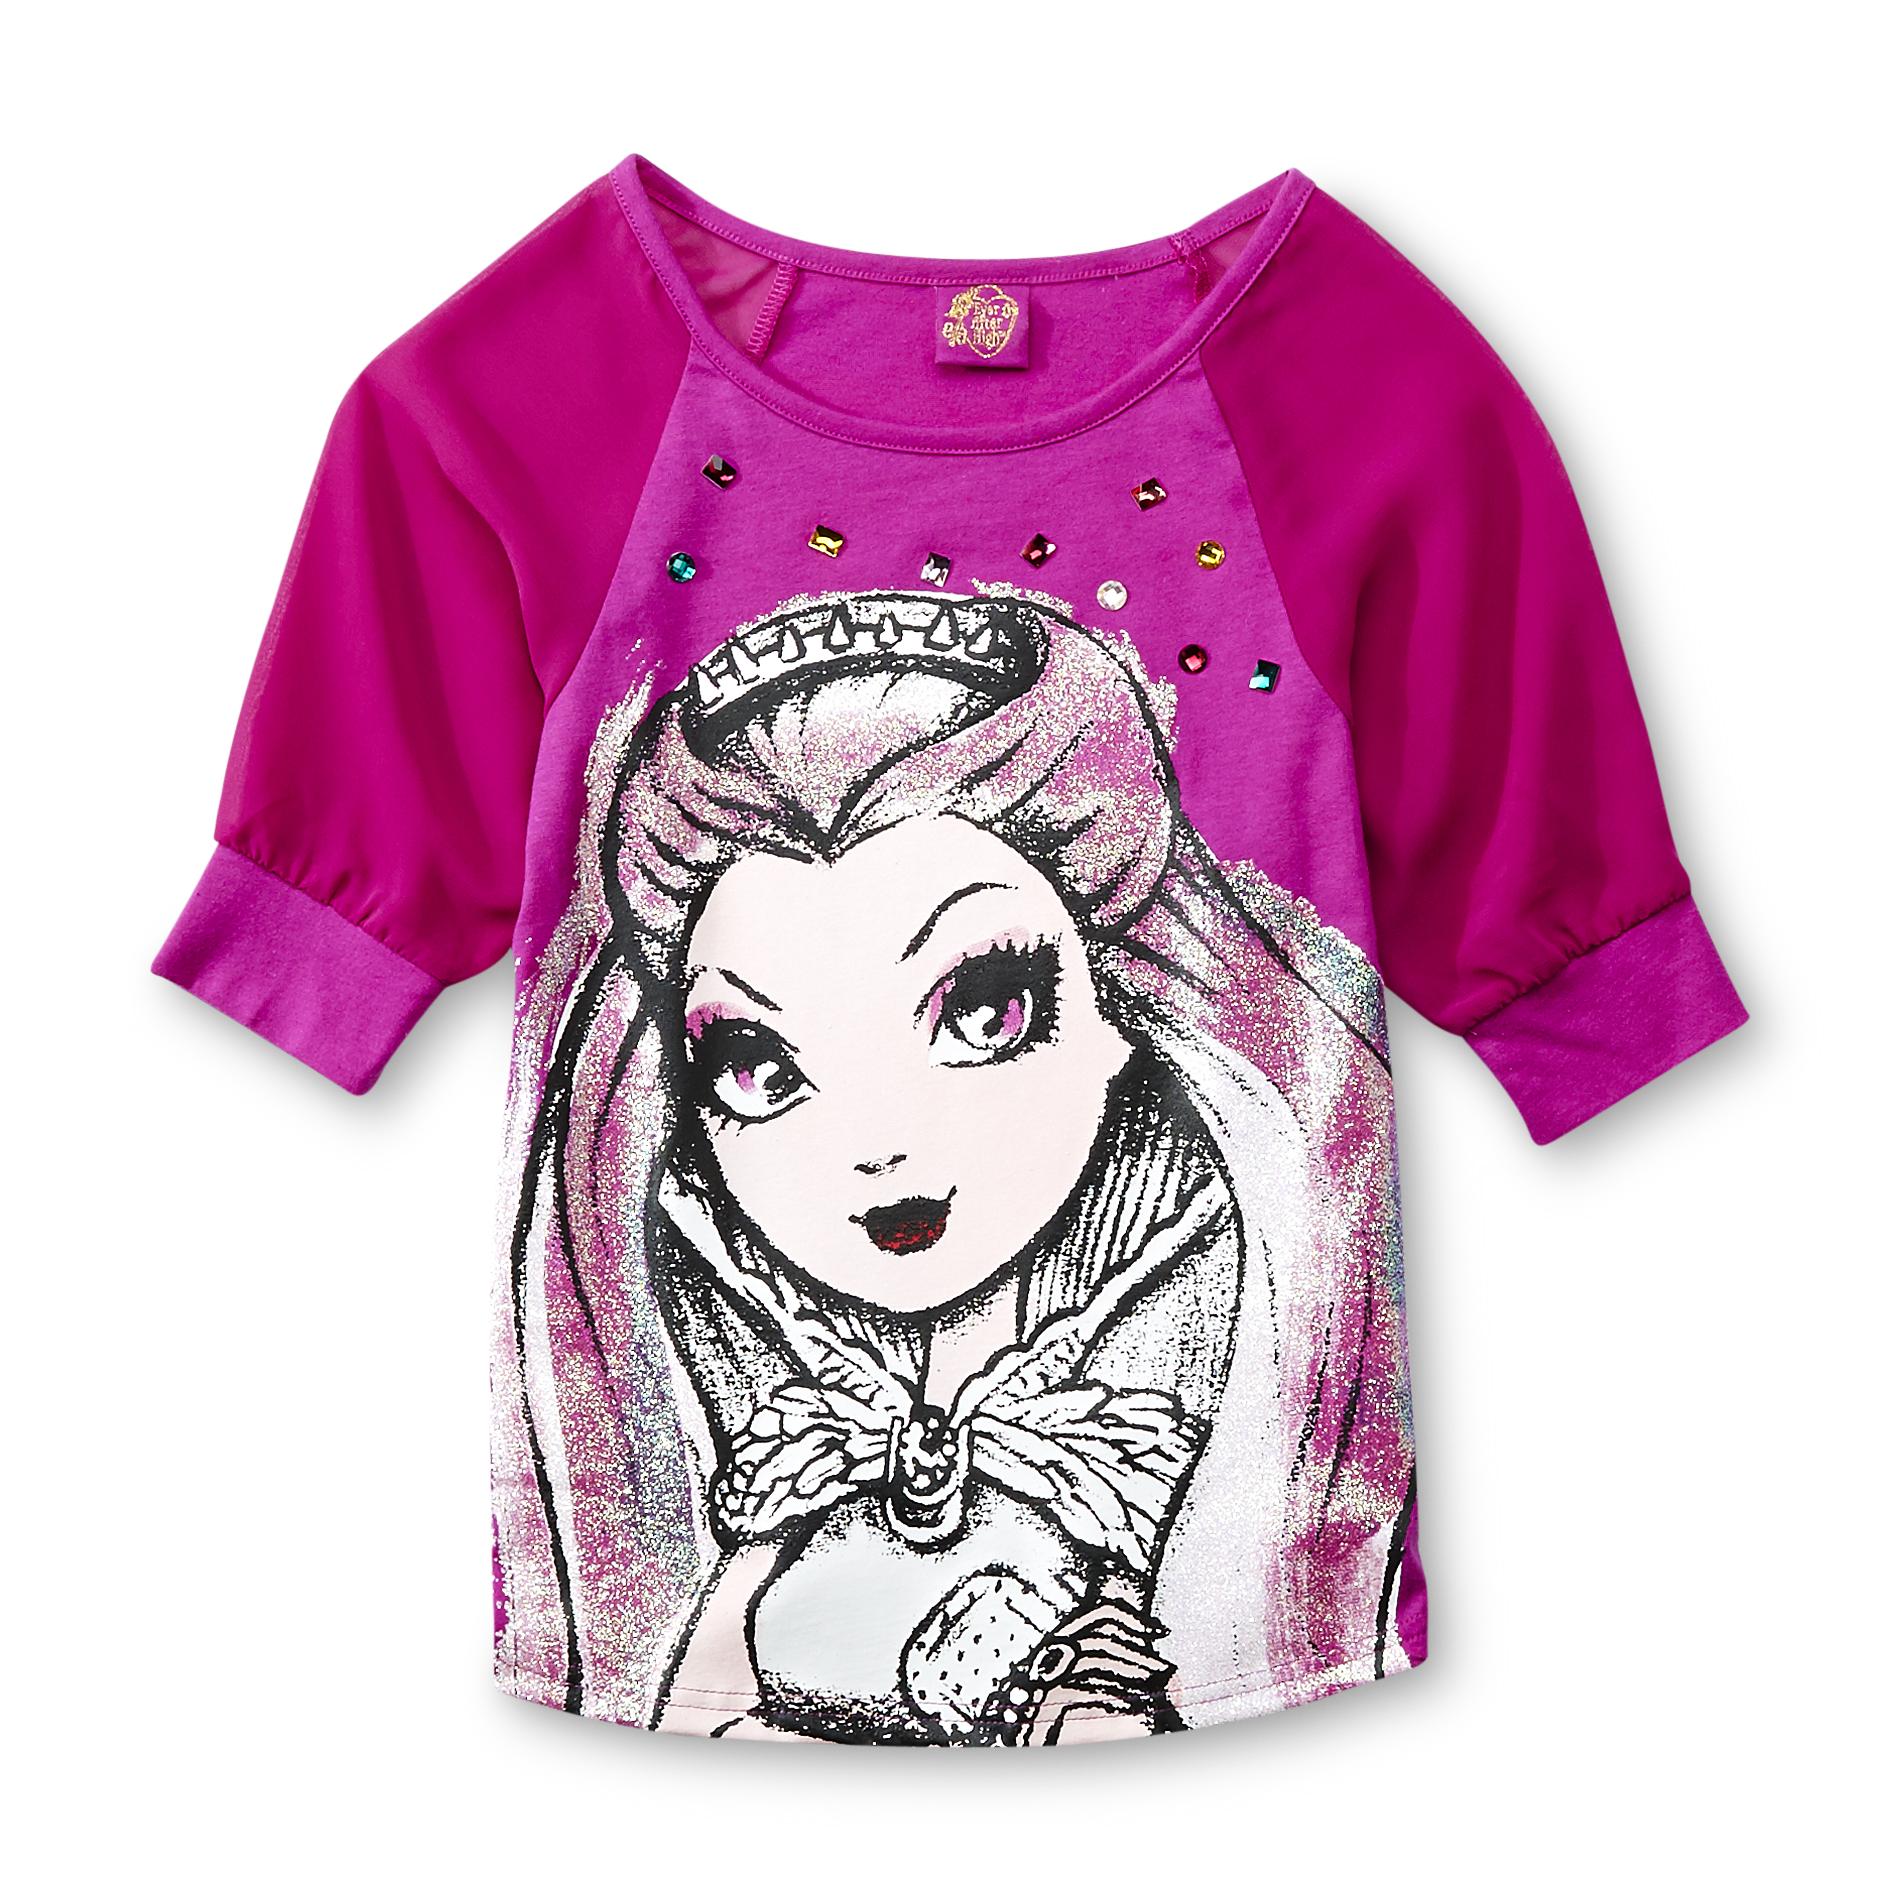 Ever After High Girl's Dolman Top - Raven Queen